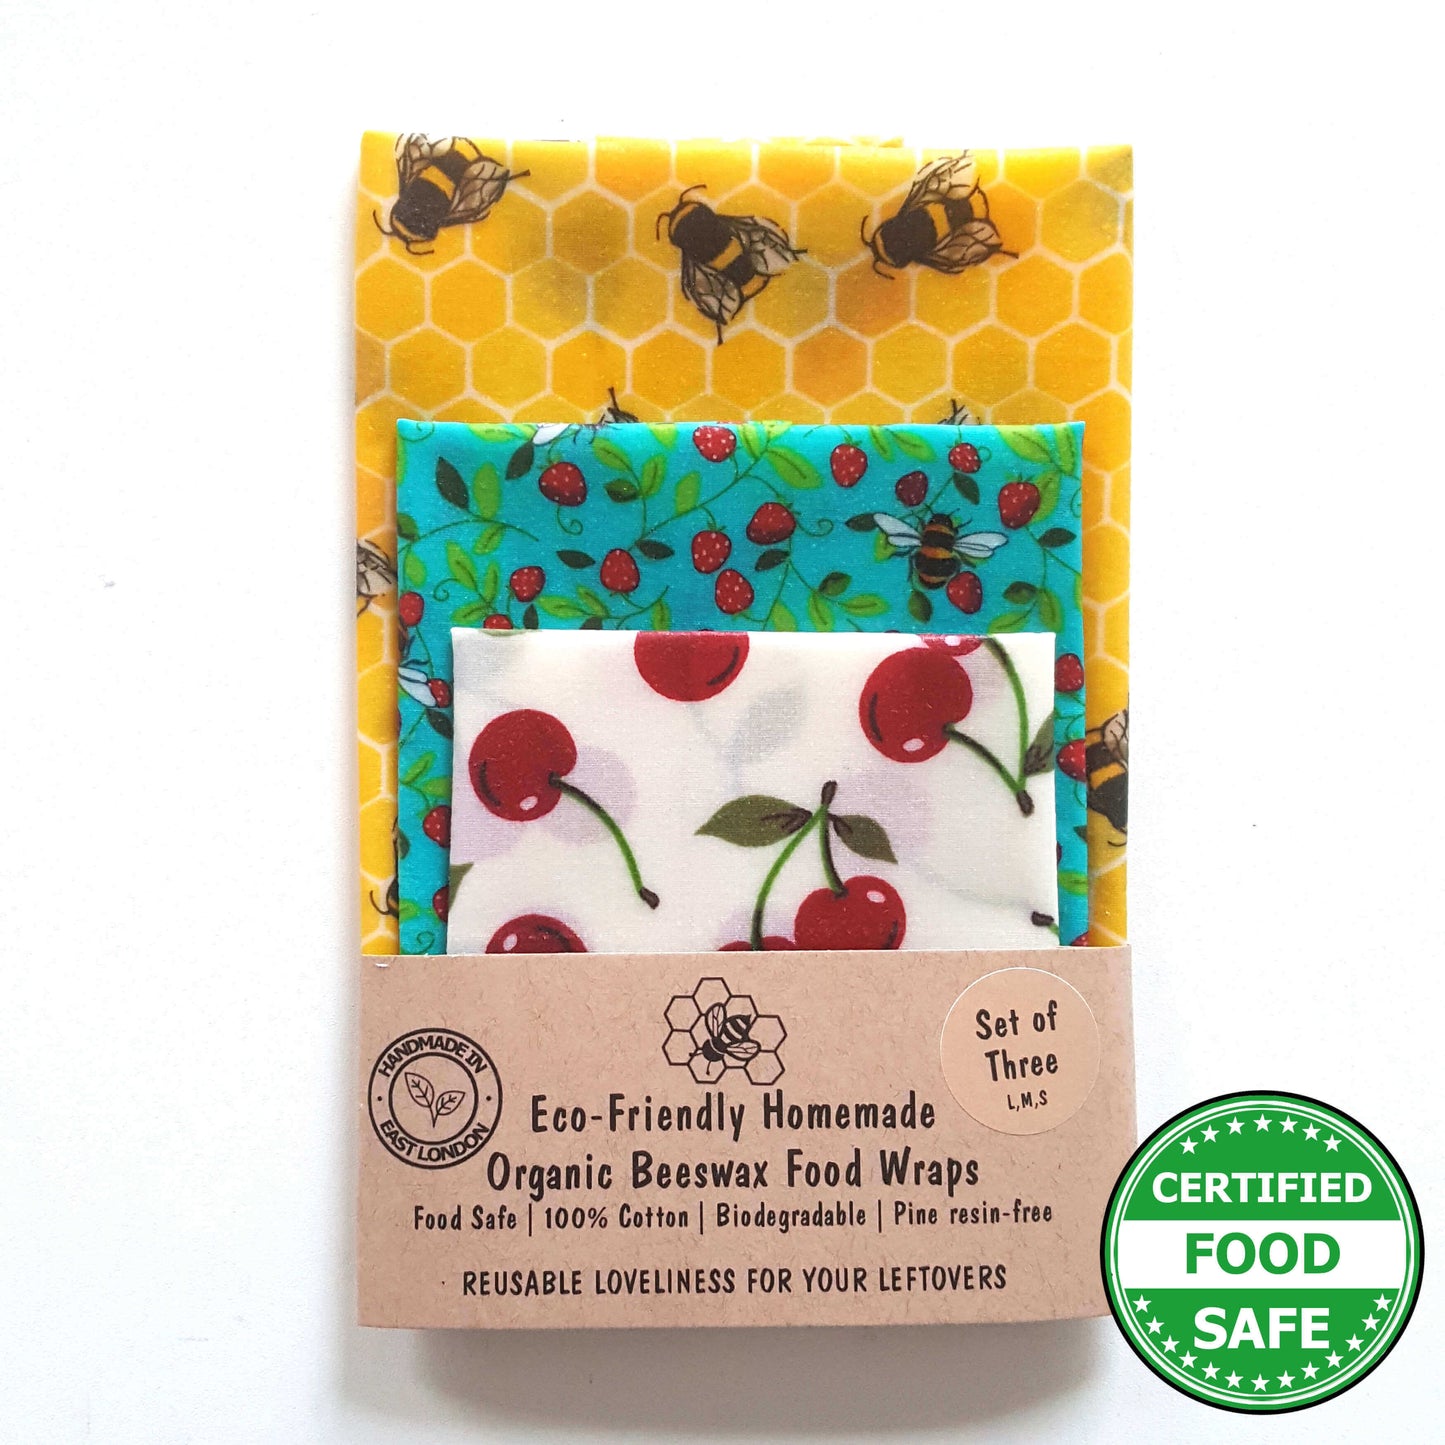 Reusable Beeswax Food Wraps 100% Hand Made in the UK by Honey Bee Good. Earth Kind Classic set of 3 in Bees & Cherries